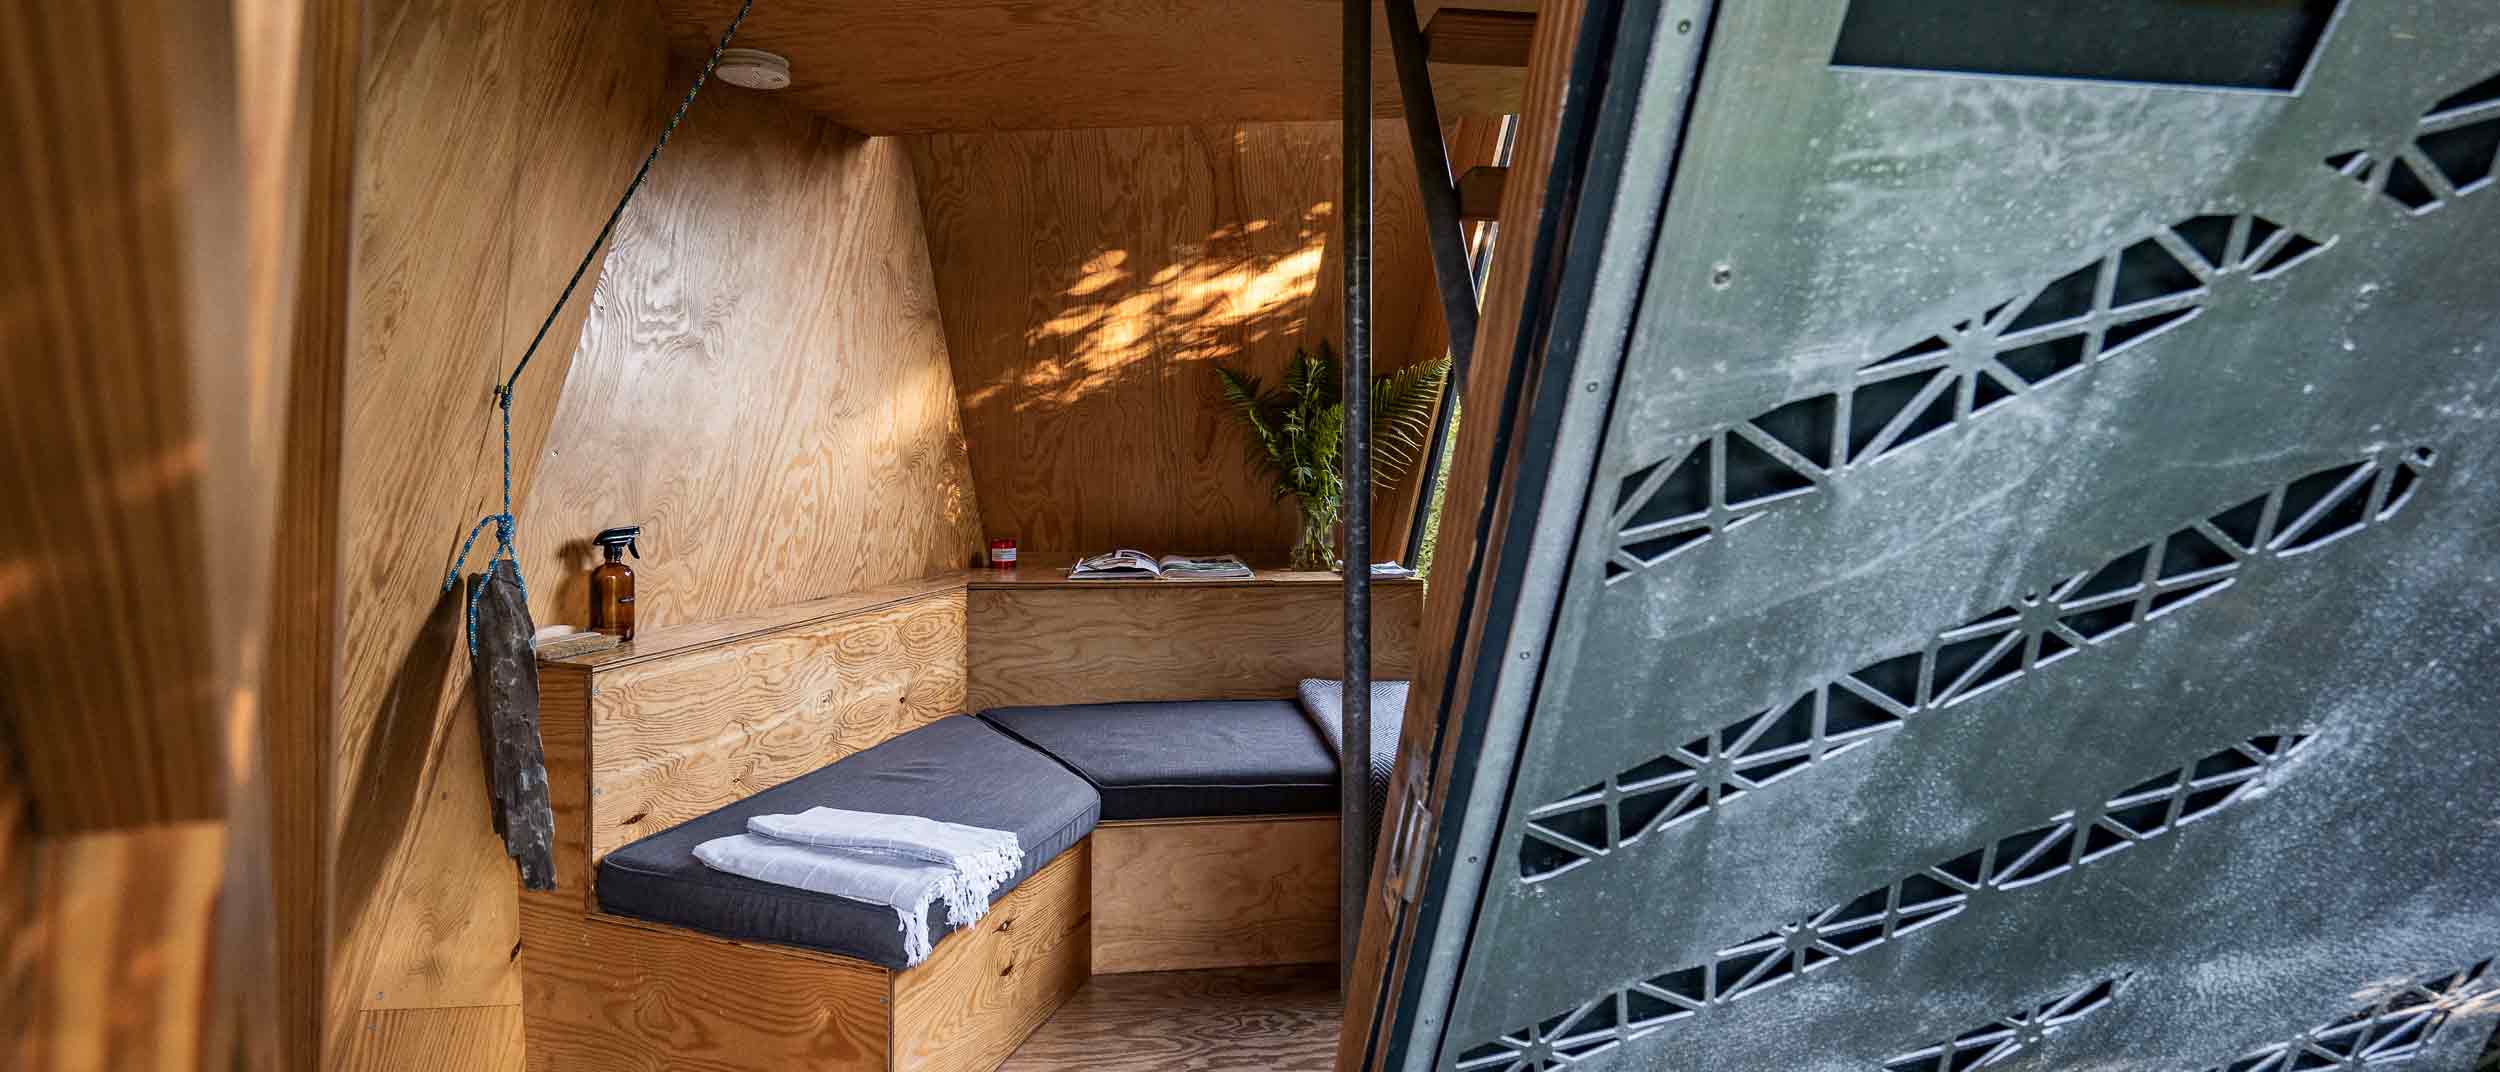 interior of an off grid Kudhva cabin, with a sofa and blankets in dappled sunlight